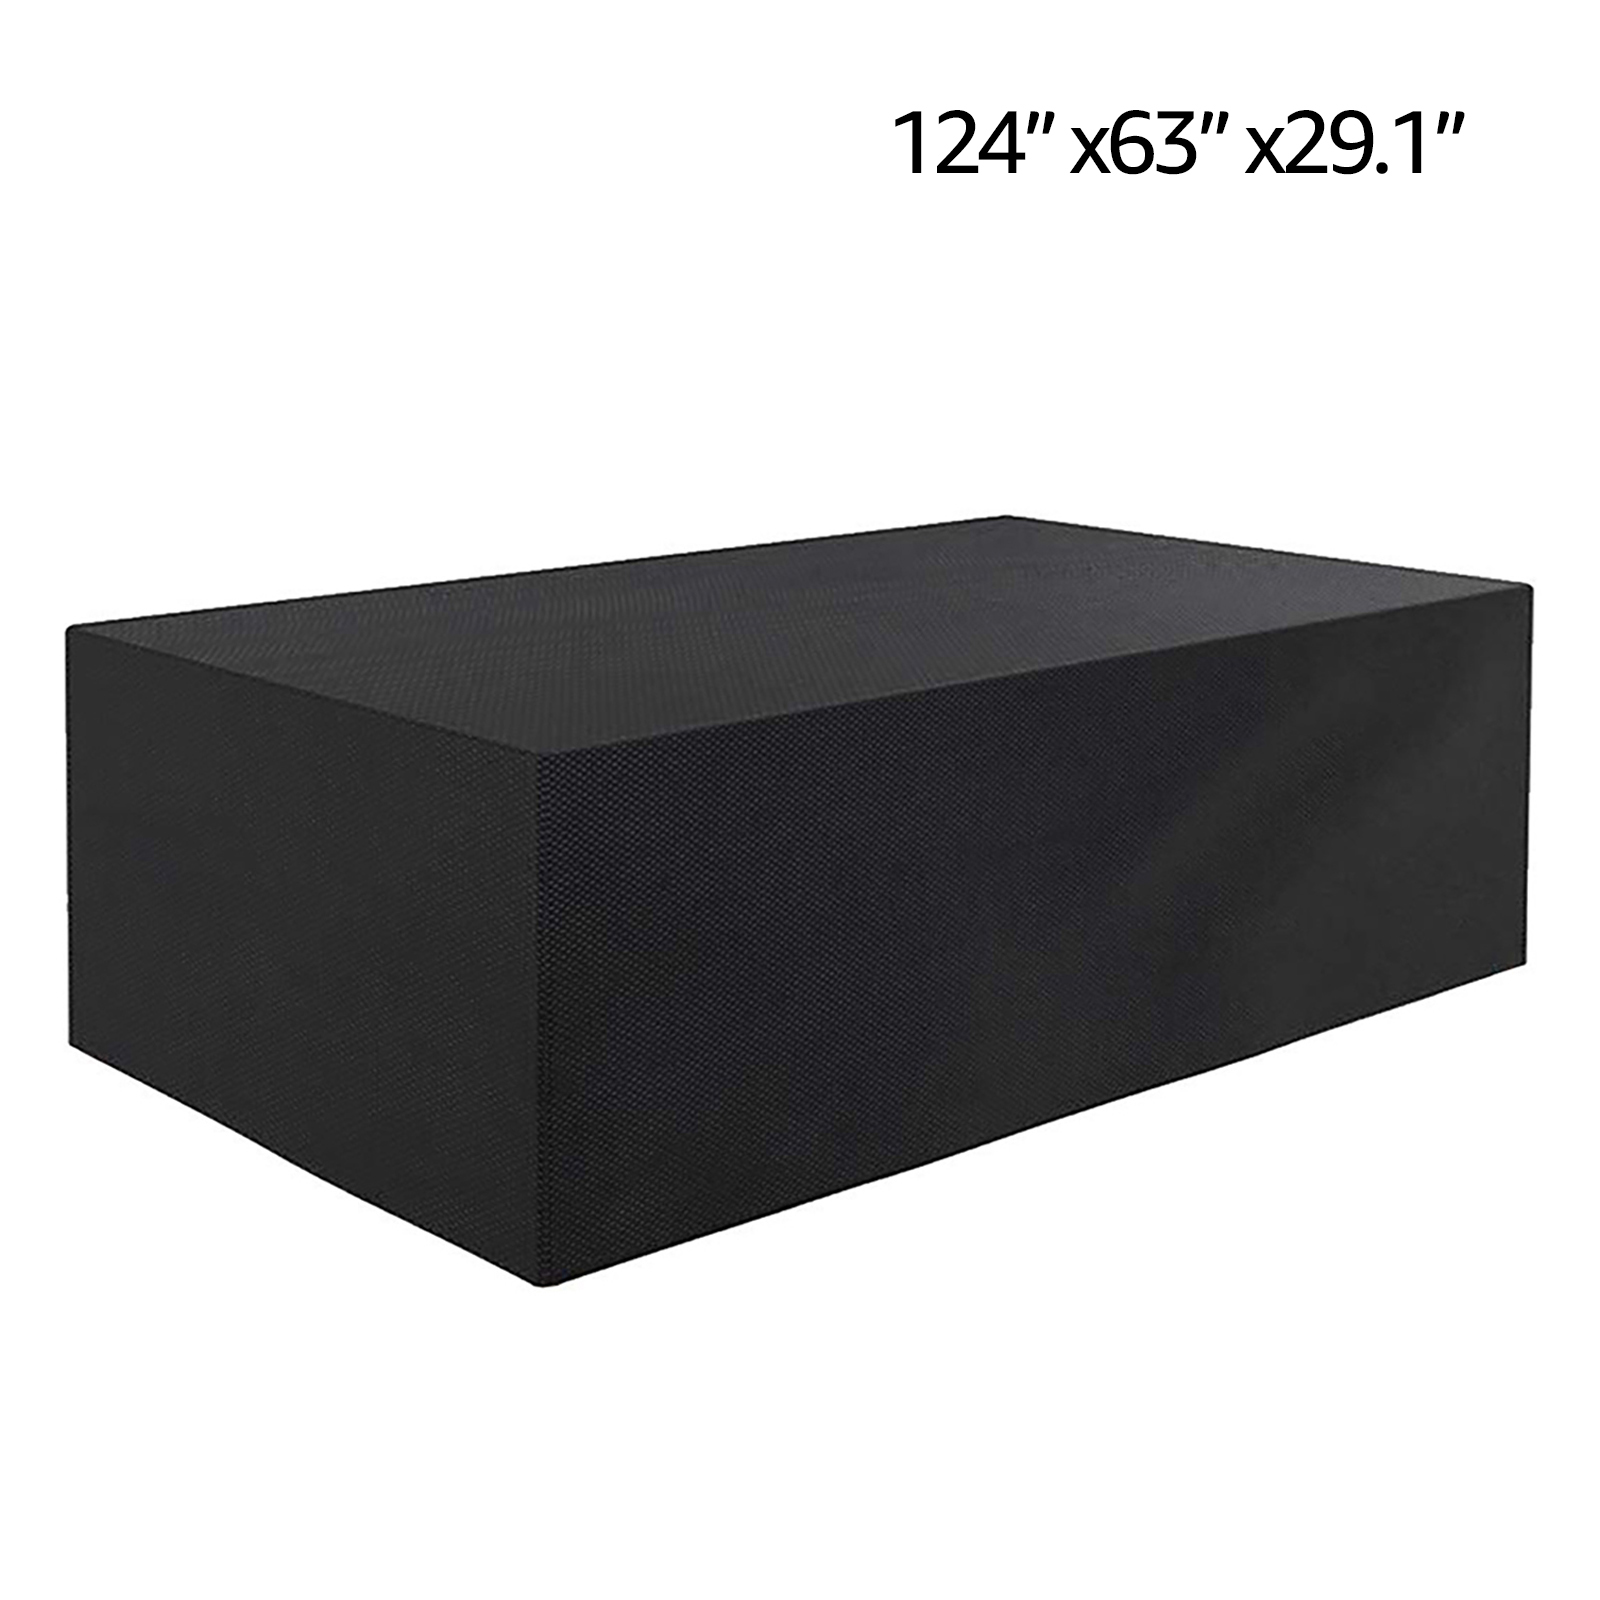 Patio Furniture Cover Set Outdoor Garden Lounge for Sofa Chair Dining Table Electrical Equipment with Waterproof and UV-Resistent 420D - image 1 of 8